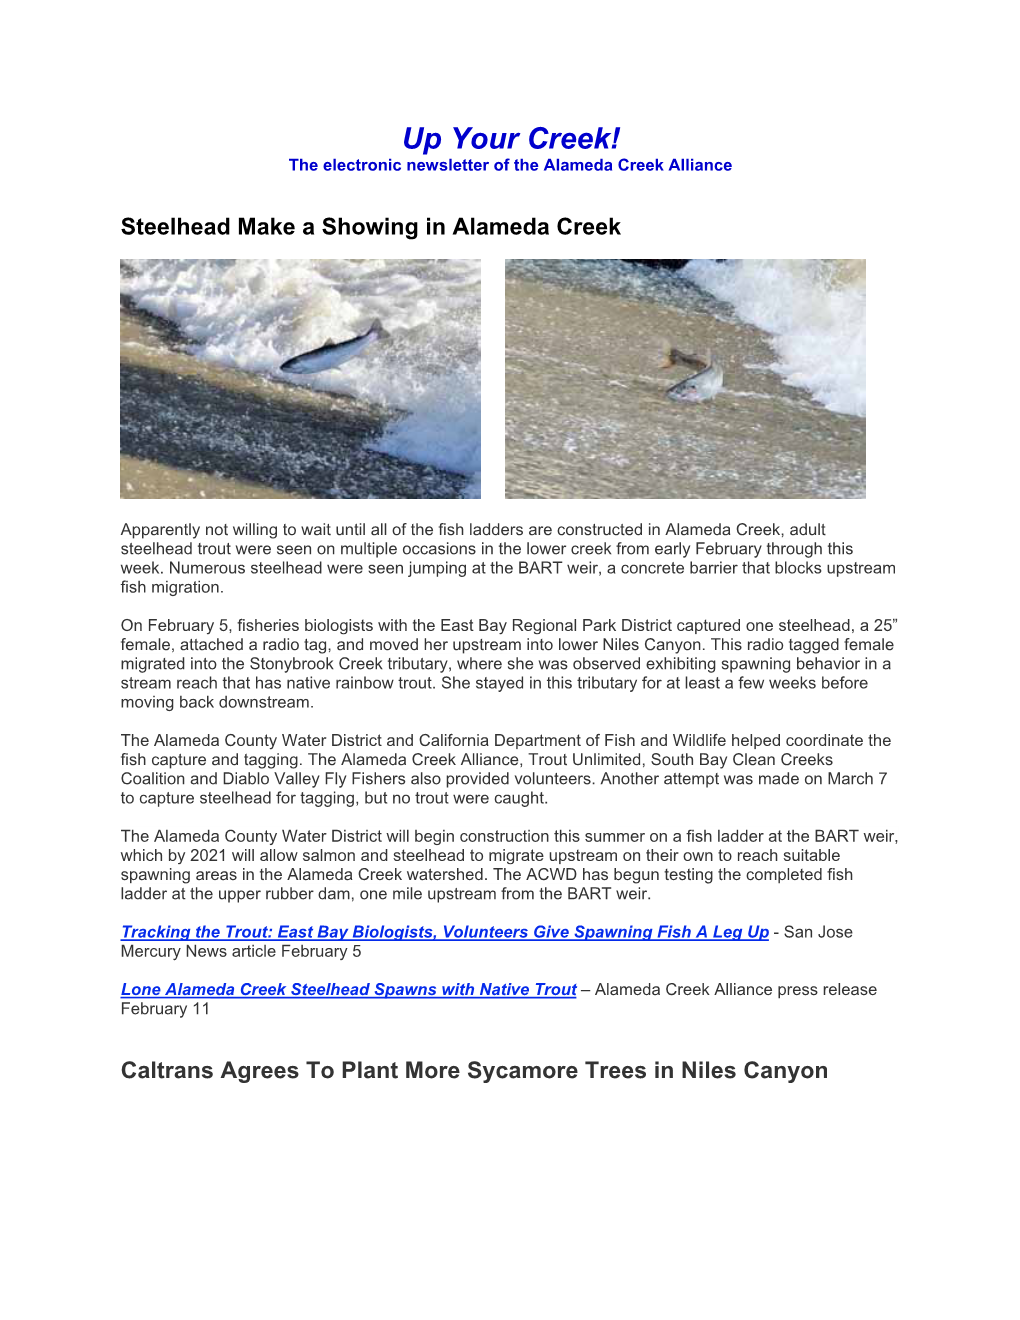 Up Your Creek! the Electronic Newsletter of the Alameda Creek Alliance